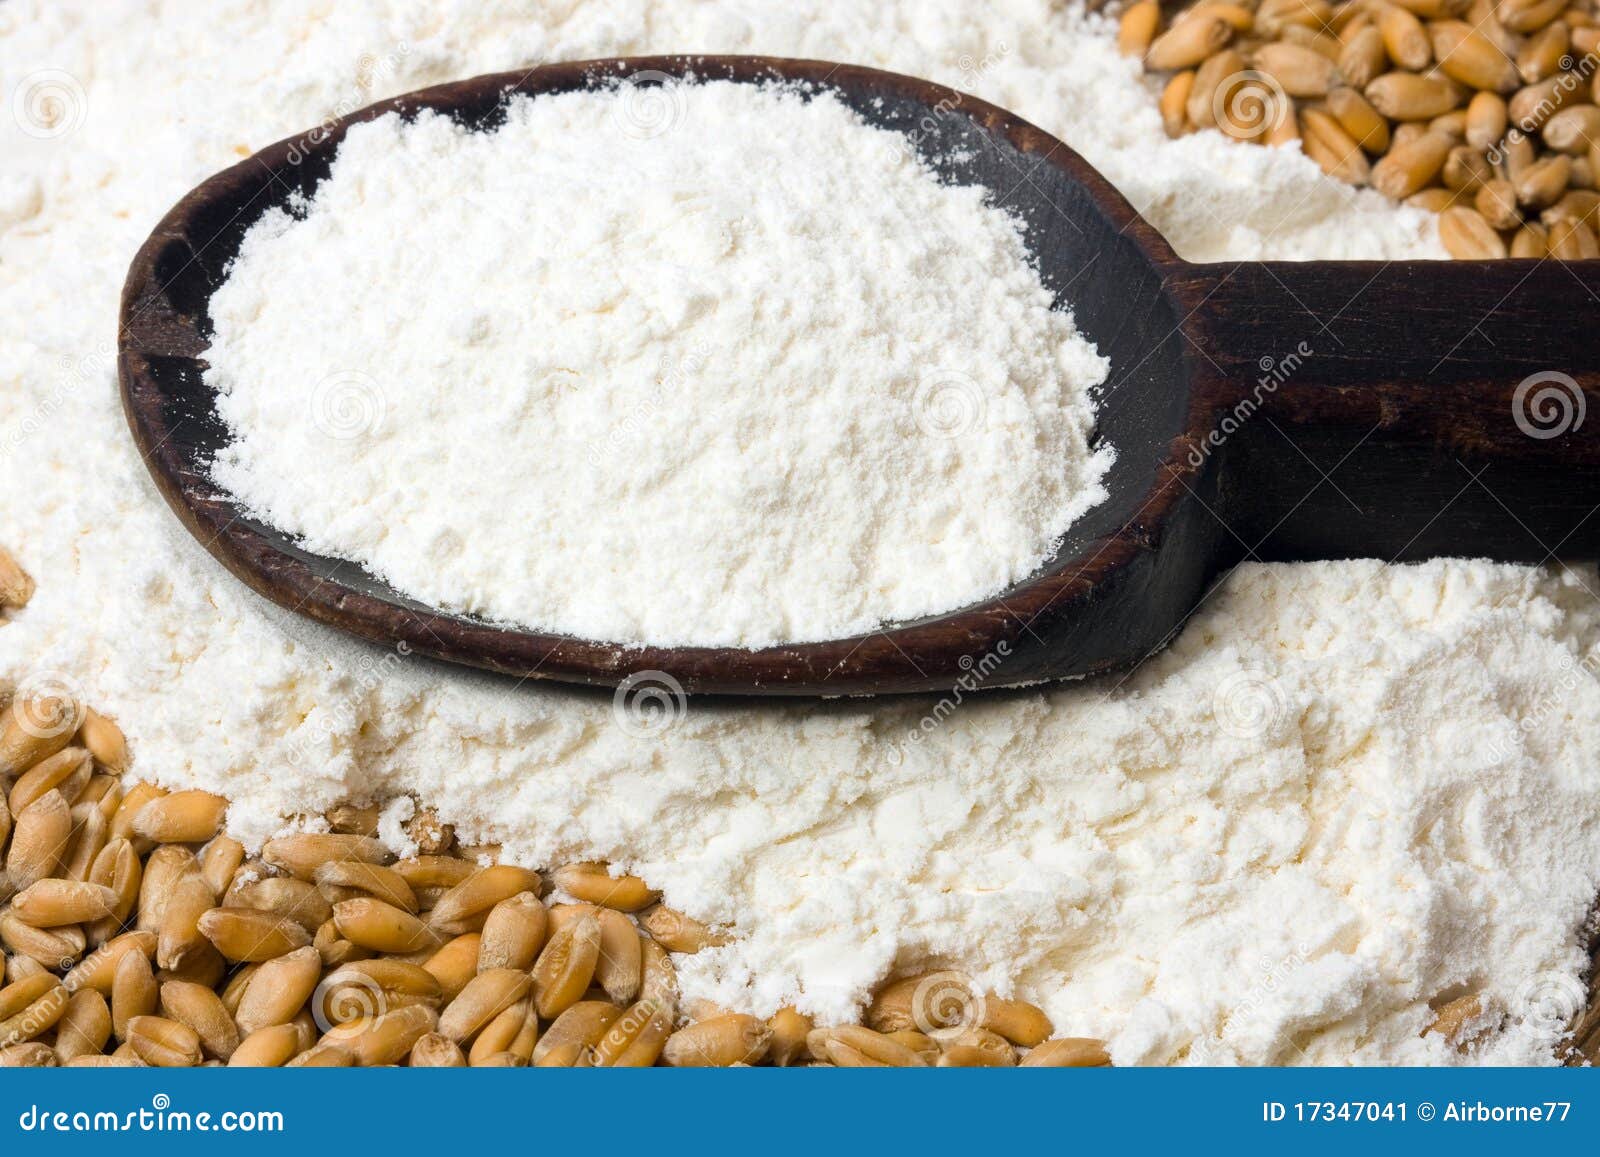 Wheat and flour stock image. Image of natural, straw - 17347041